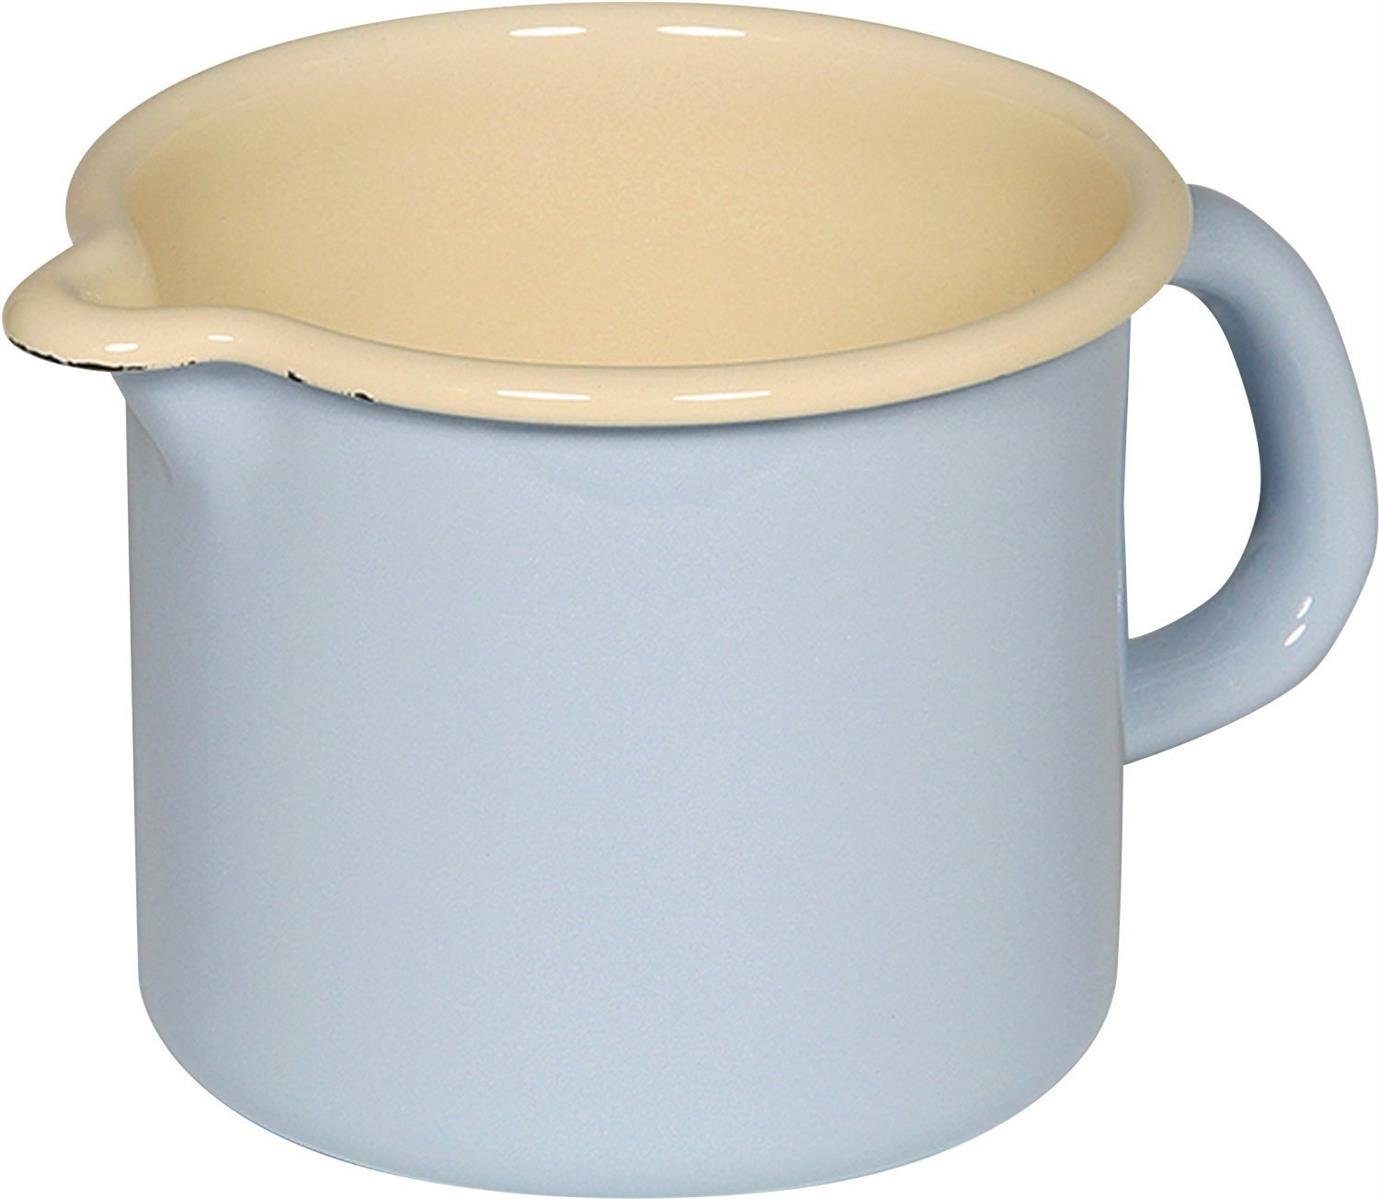 Riess Milchtopf Riess Schnabeltopf Ø9cm 0,5 Liter Classic Pastell Blau Emaille